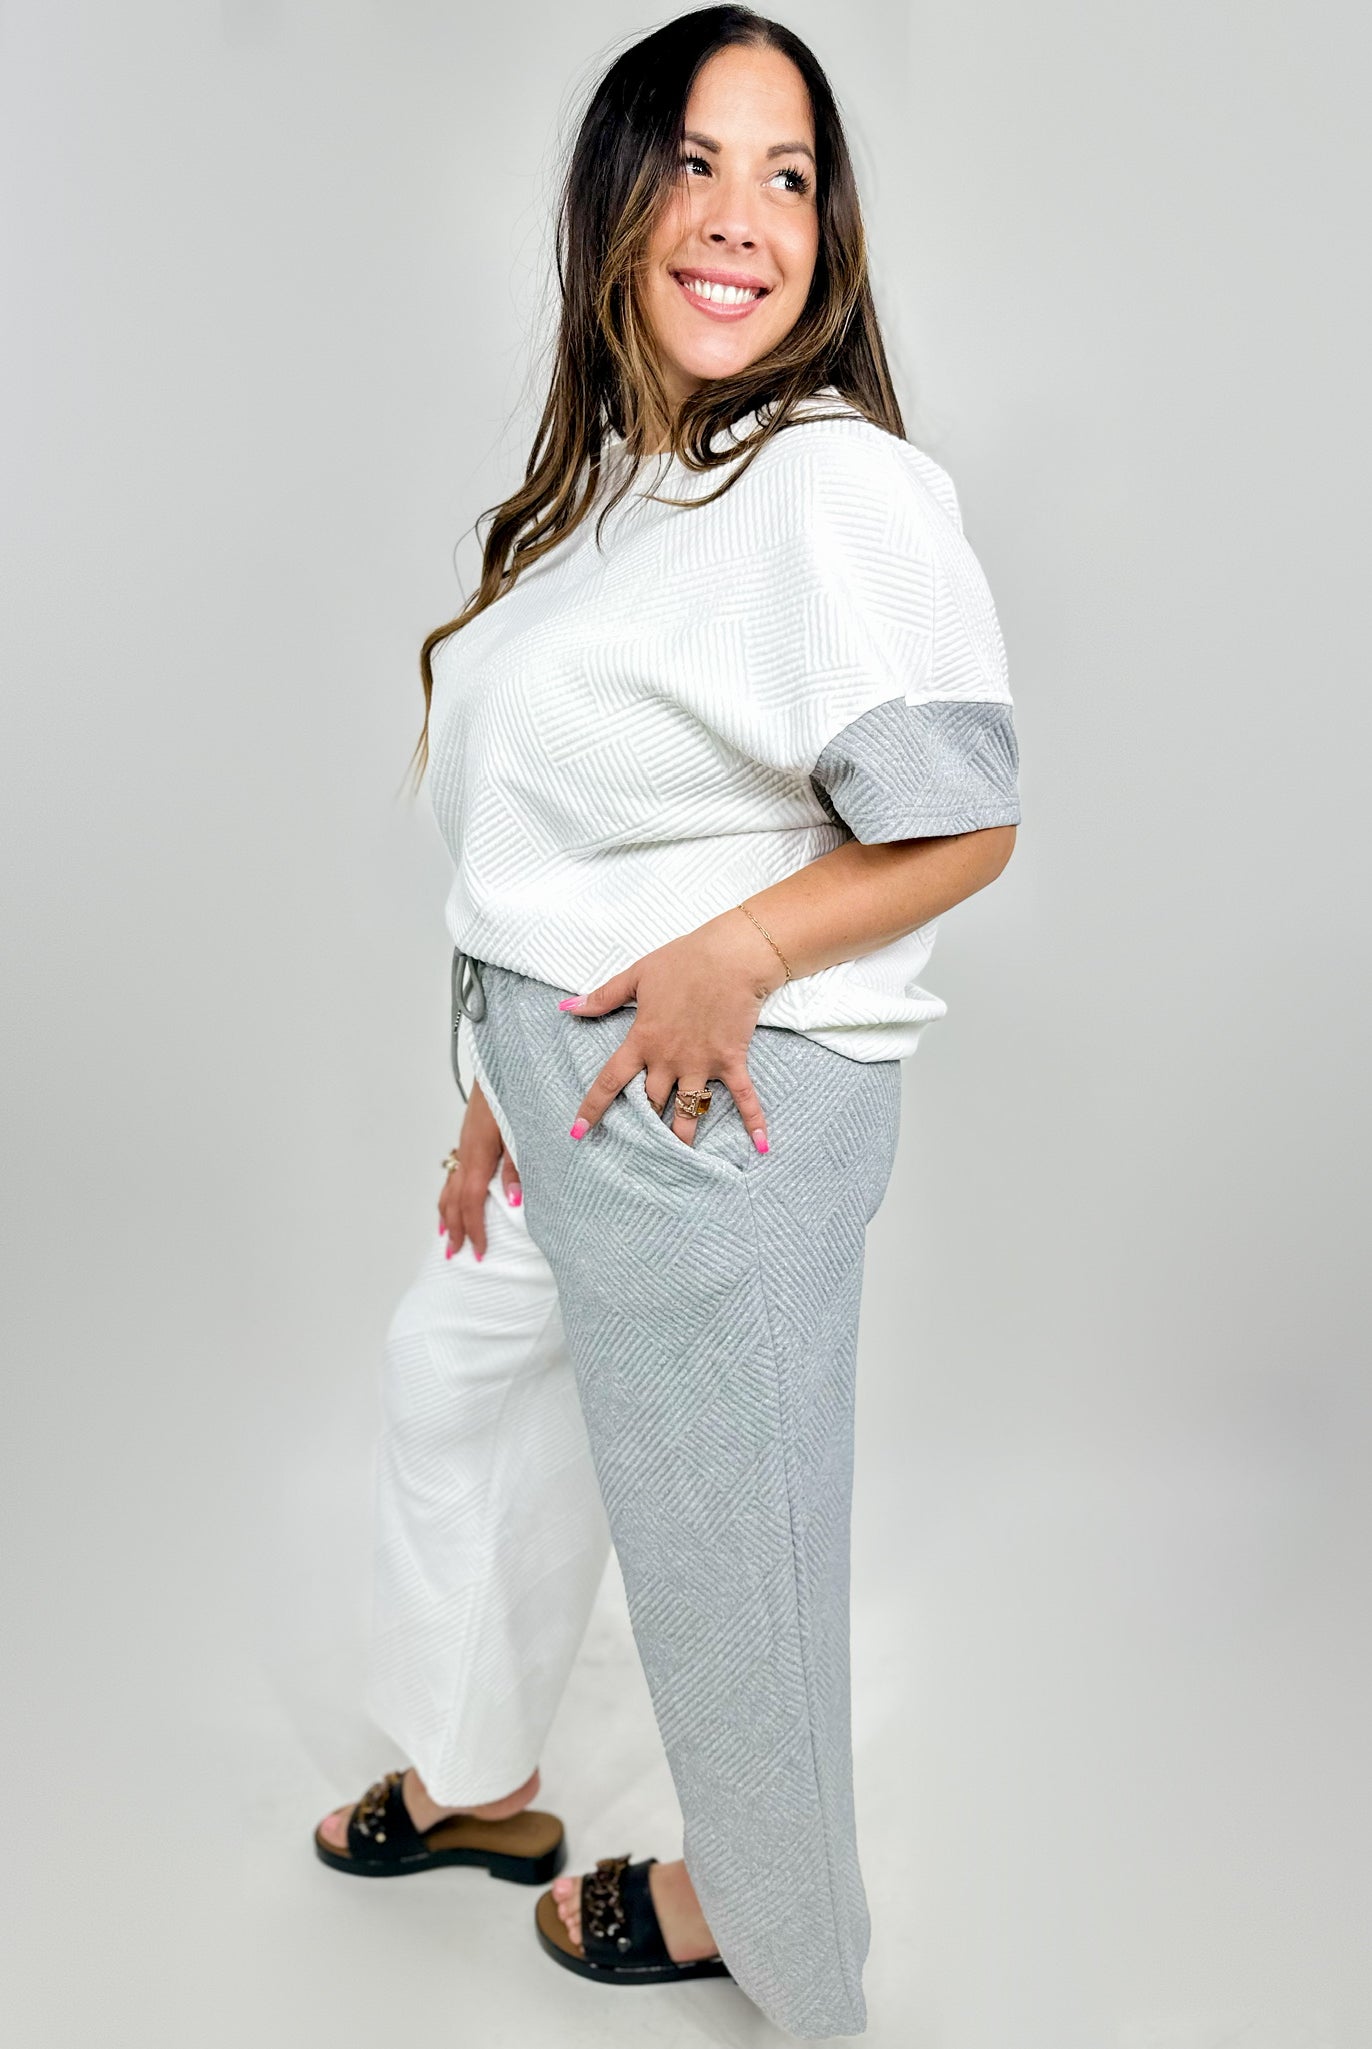 Make Your Mark T-Shirt and Wide Leg Pants Set-240 Activewear/Sets-DOUBLE TAKE-Heathered Boho Boutique, Women's Fashion and Accessories in Palmetto, FL